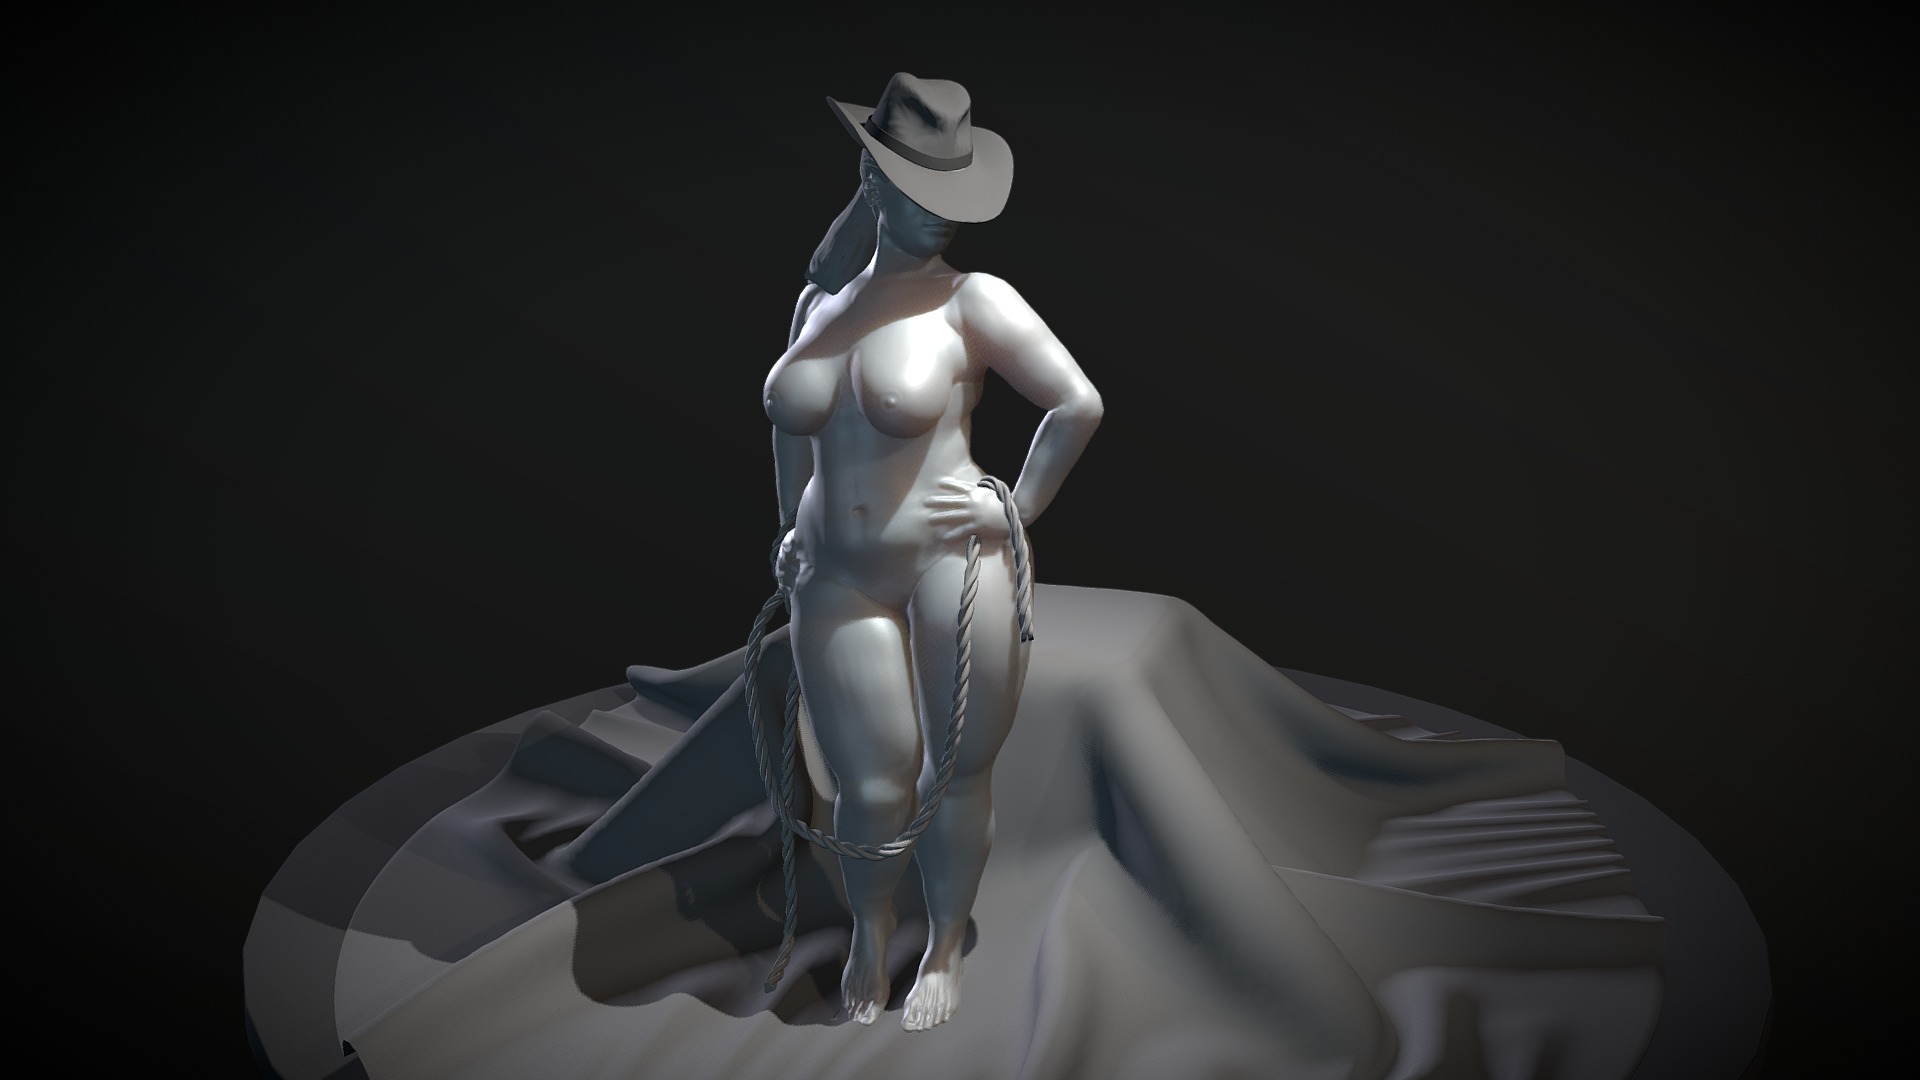 Curvy Model

Maya, ZBrush, OBJ, STL and FBX files included. Clean topology and UV maps laid out for all objects. 

Files:
OBJ (compatible will 3D Studio Max, C4D, Blender and more)
FBX (compatible will 3D Studio Max, C4D, Blender and more)
STL (for 3D printing) (W: 56mm, H 24mm, D 56mm)
MB (Native Maya 2018, Arnold) - Curvy Model - Buy Royalty Free 3D model by dcbittorf 3d model